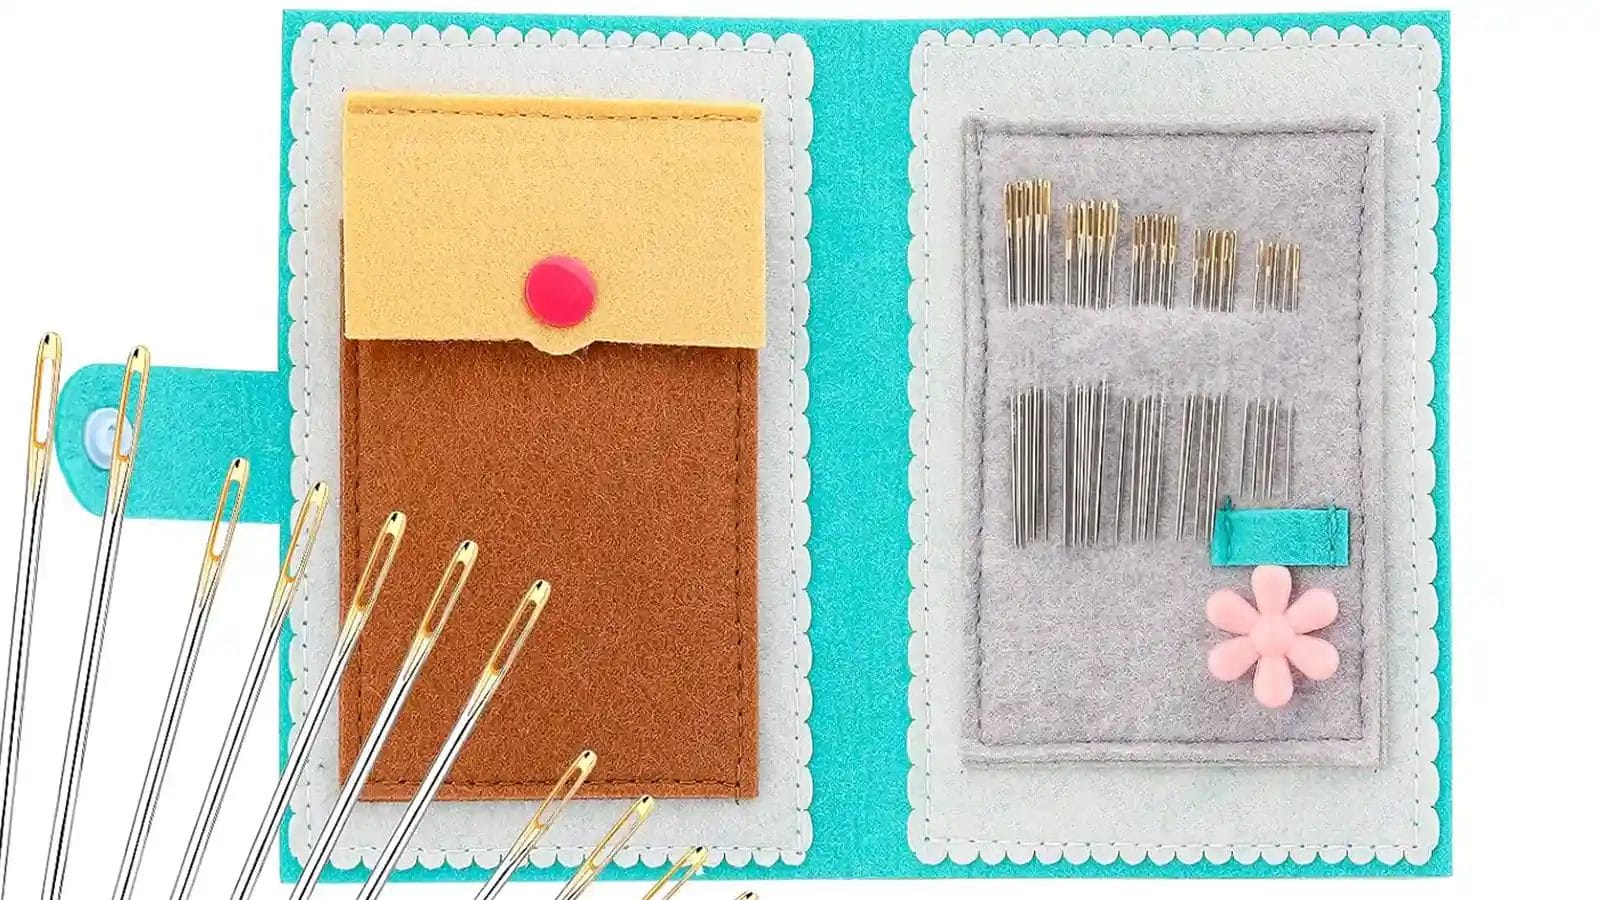 How to Store Sewing Needles